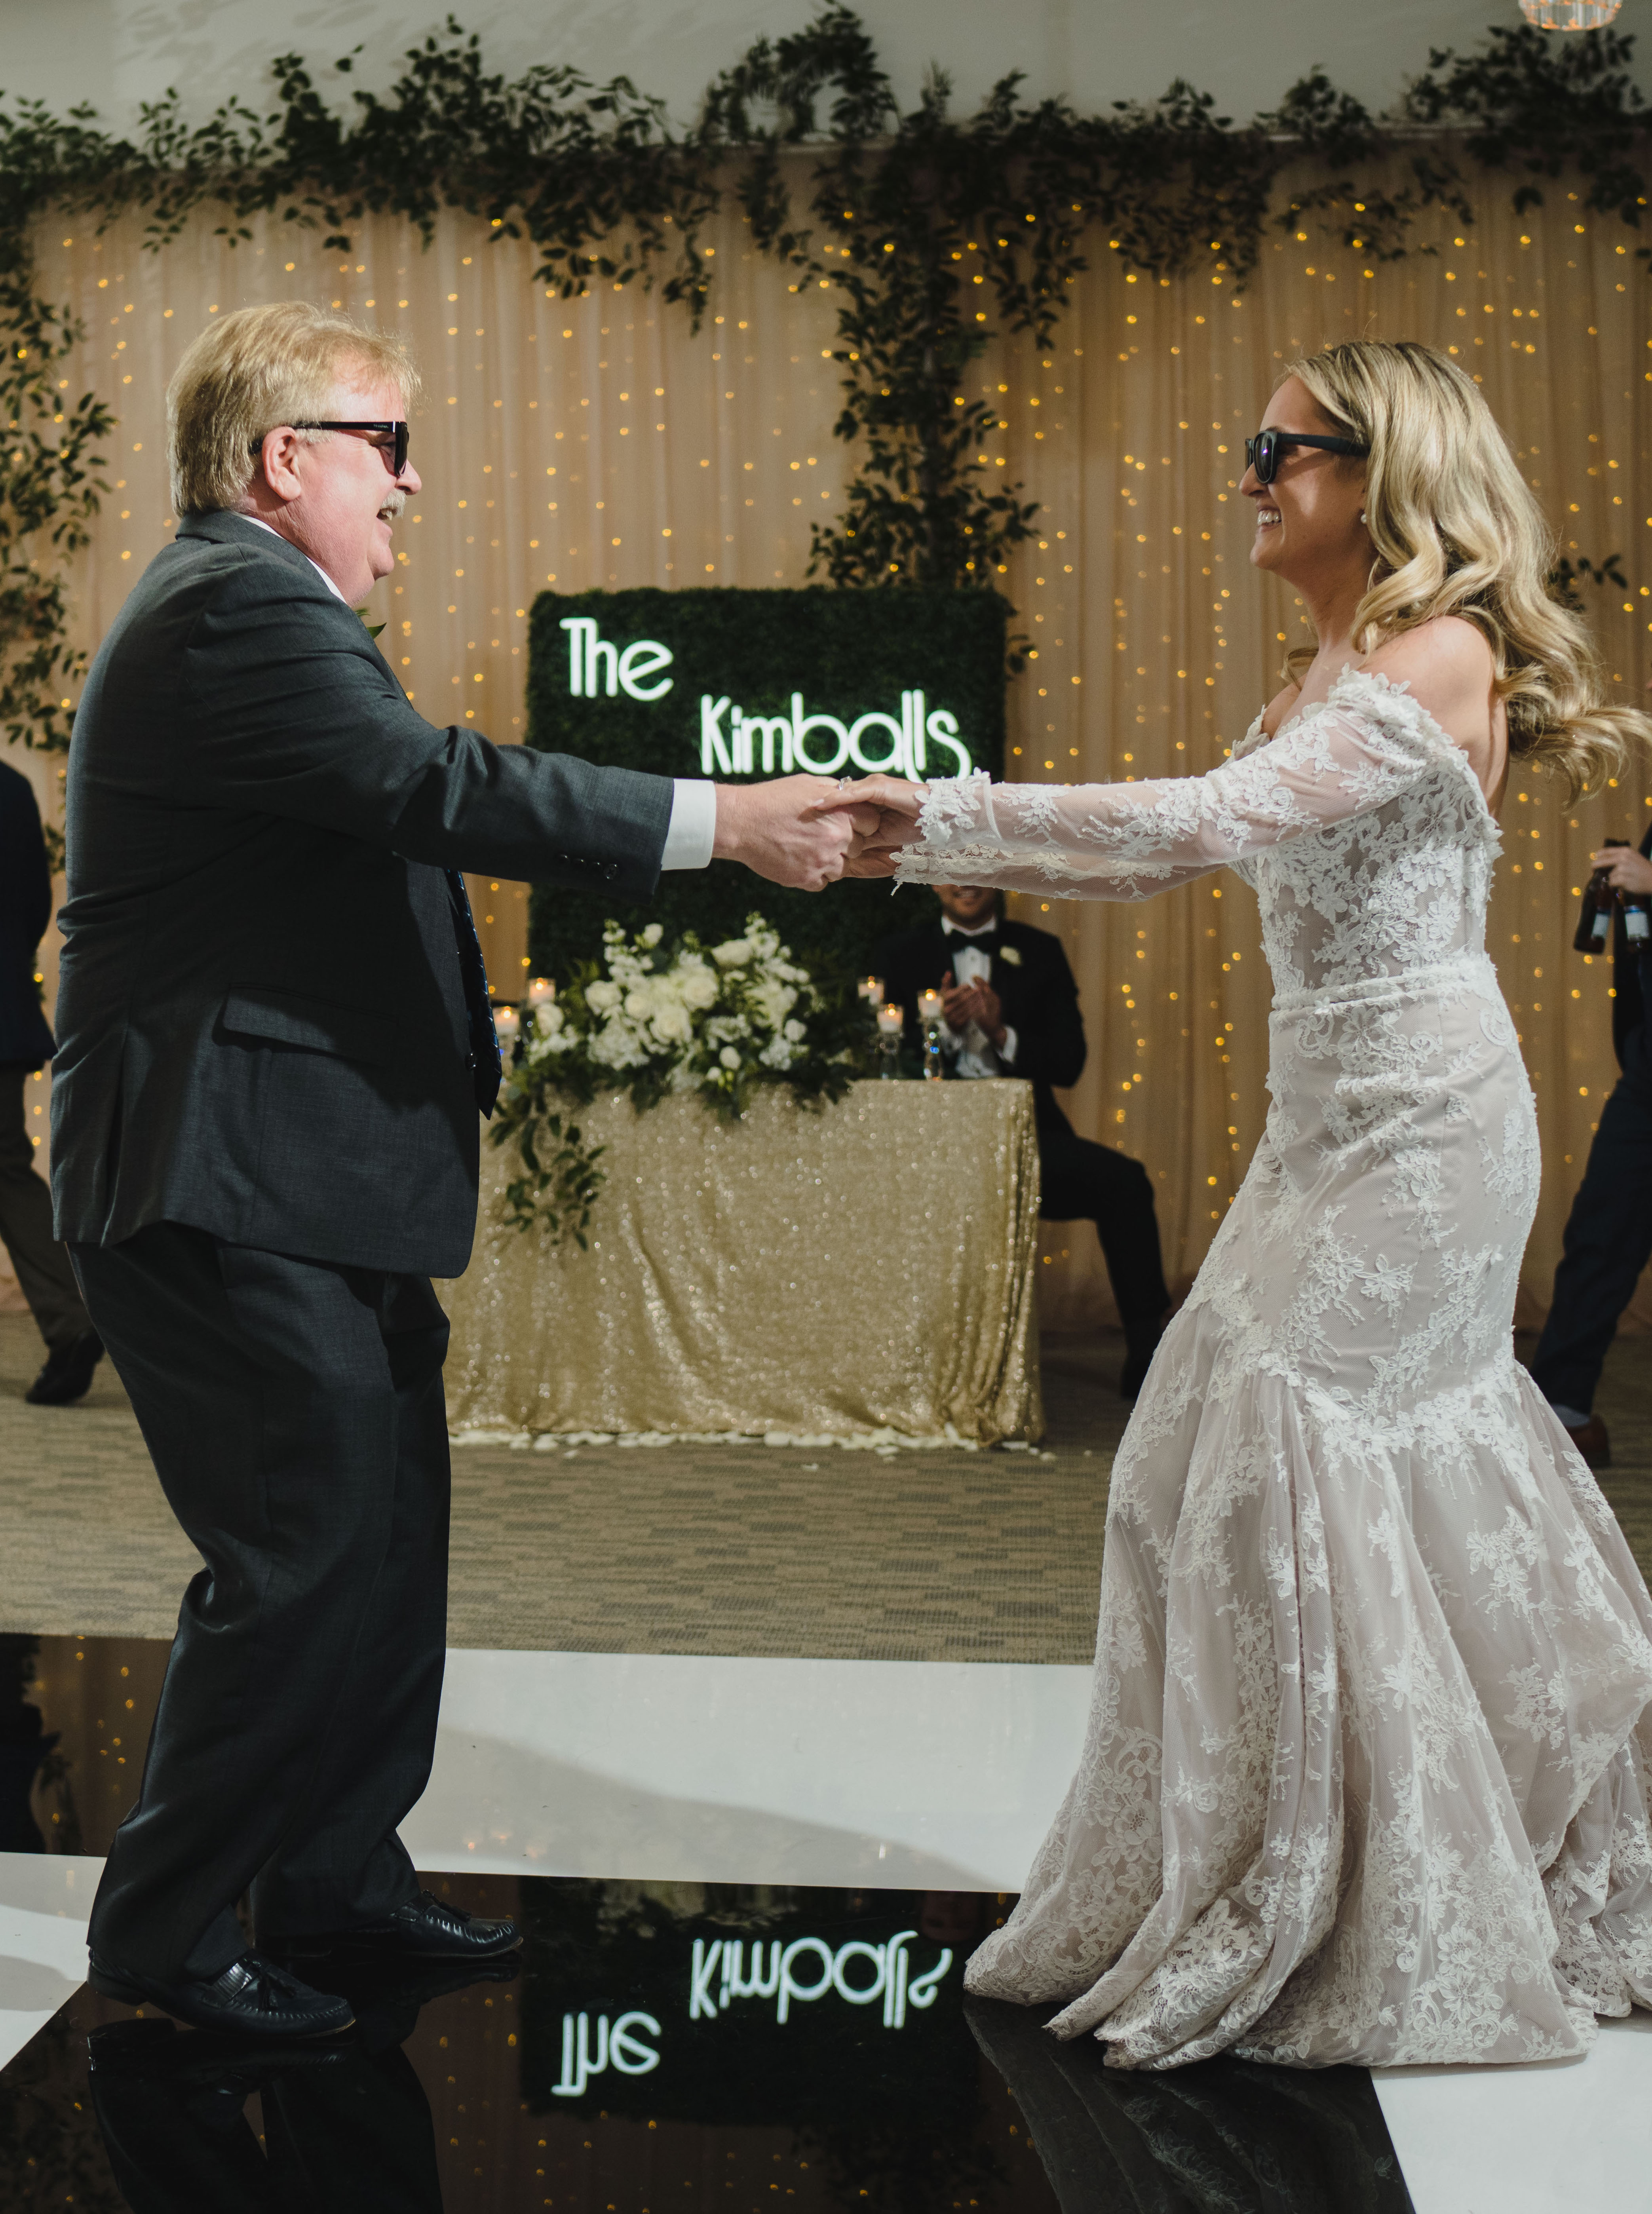 The bride, Christina Creedon, dances with her father at their wedding reception at The Wynden in Houston, TX.